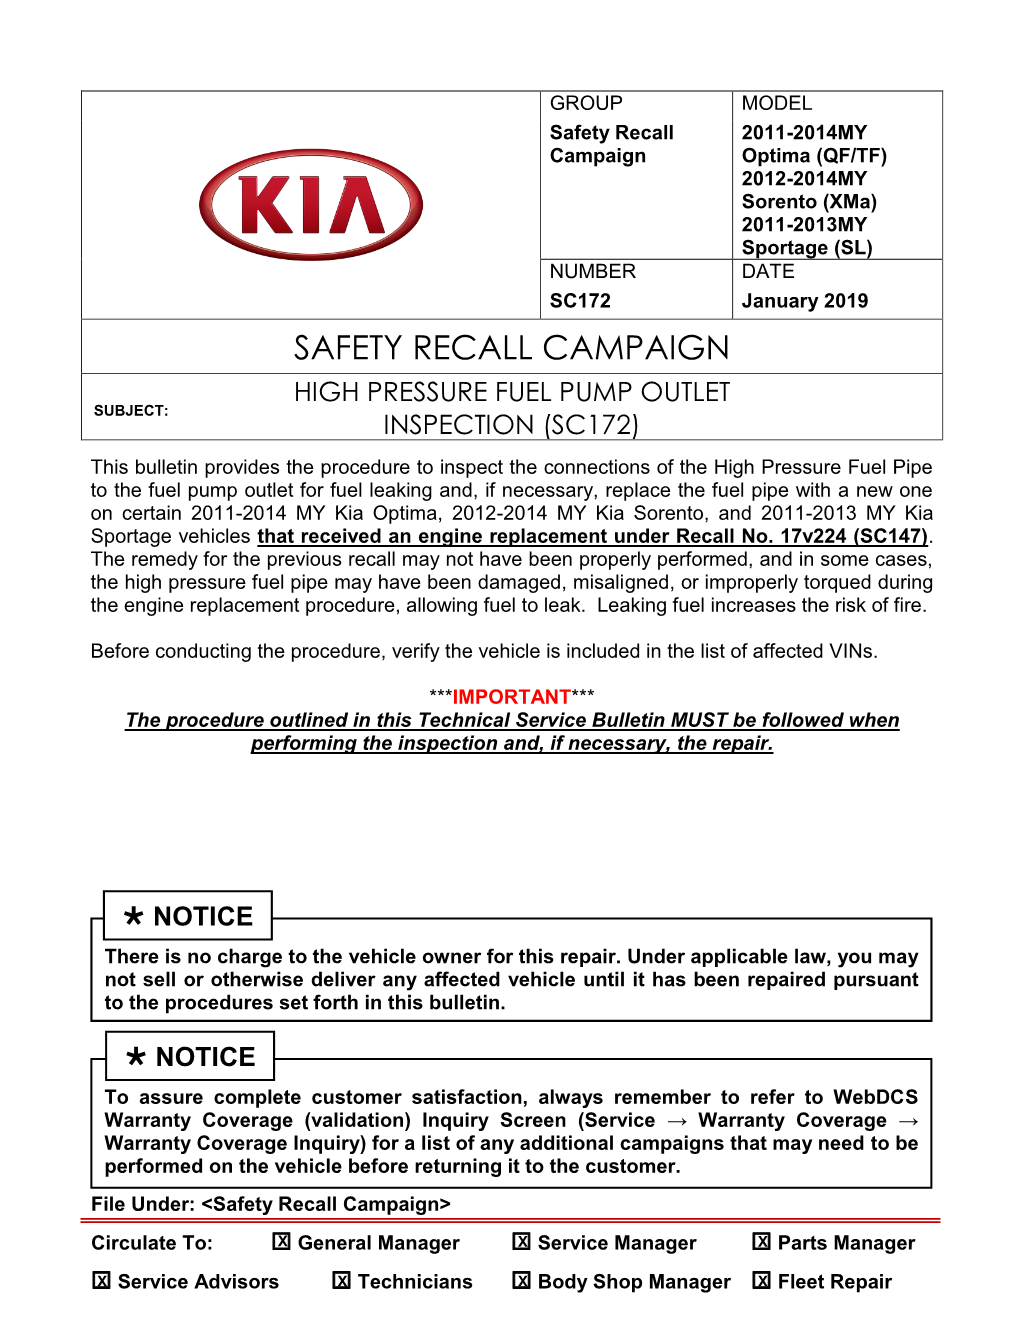 Safety Recall Campaign High Pressure Fuel Pump Outlet Subject: Inspection (Sc172)